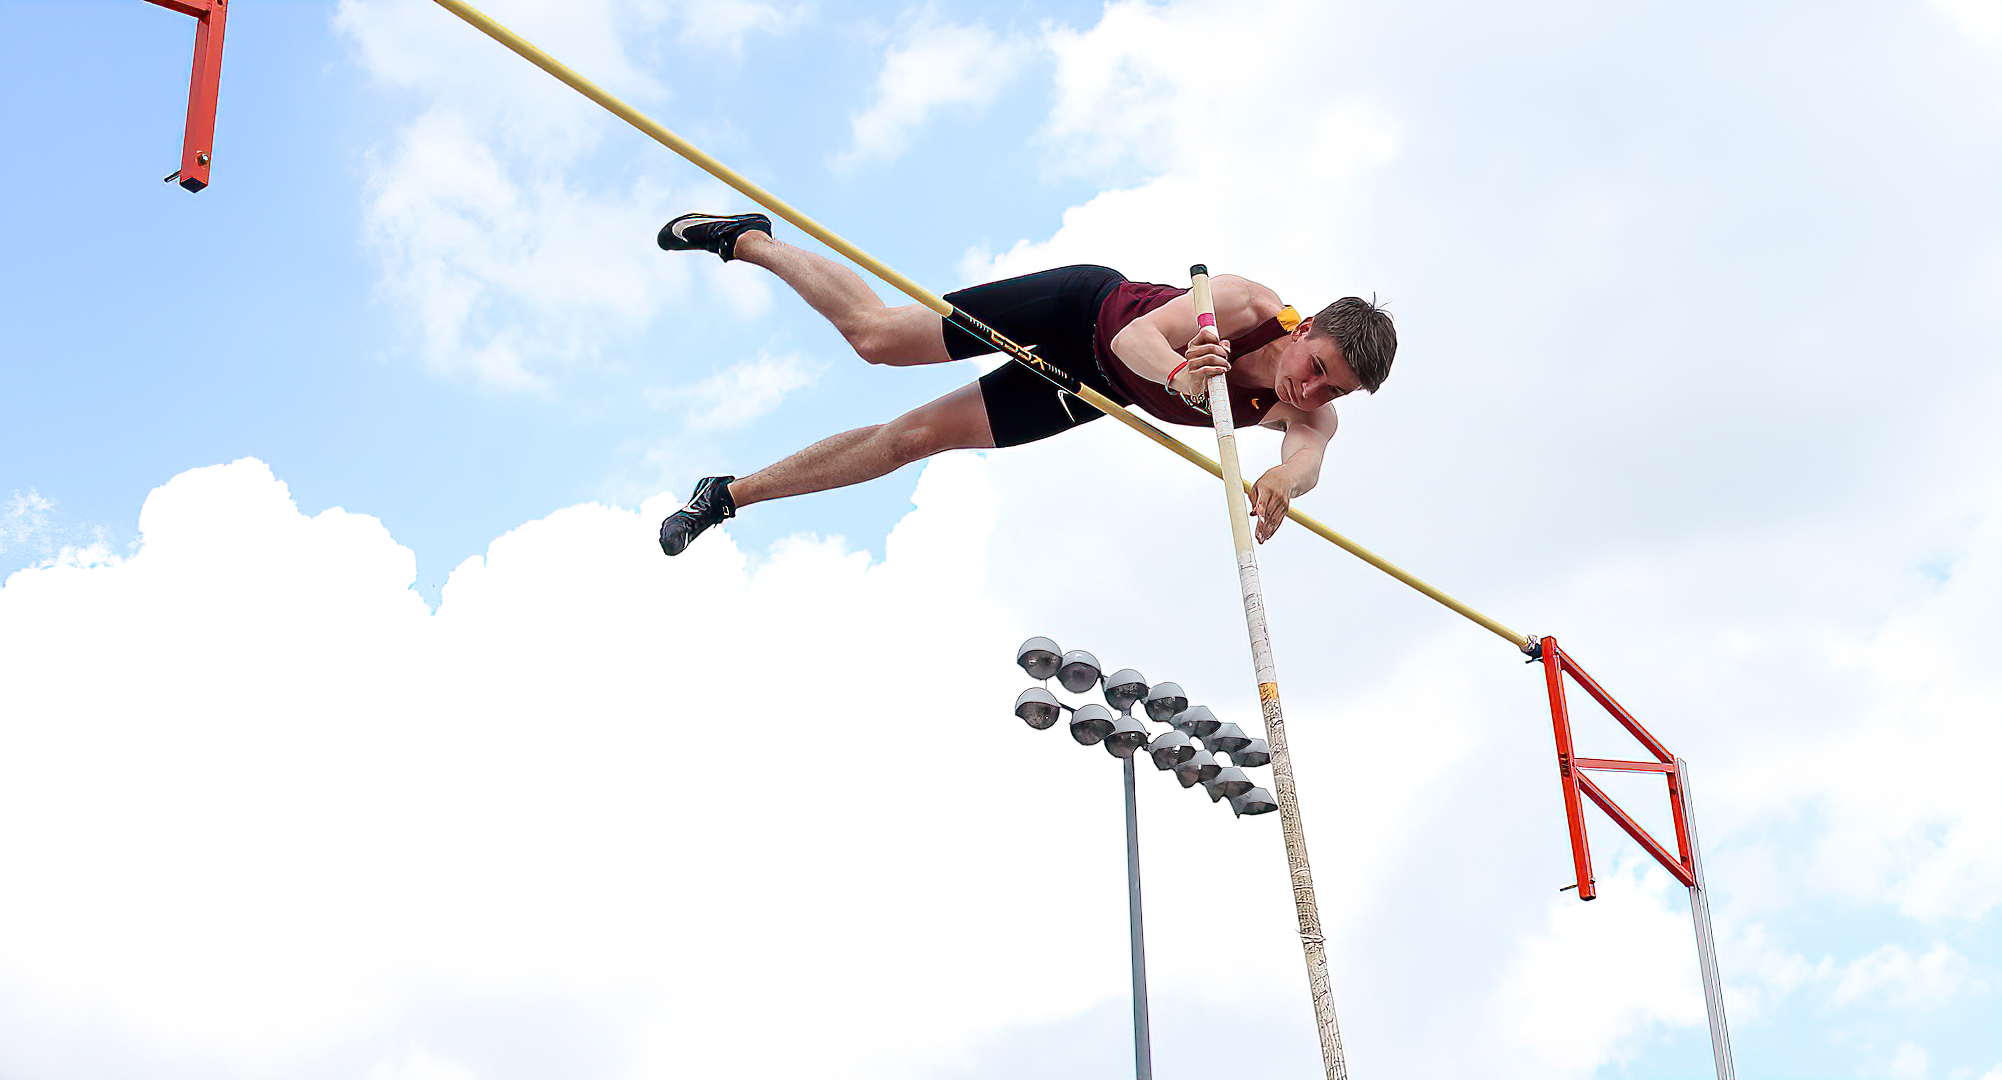 Wade Rhonemus posted a PR score of 6,011 points in the decathlon at the North Central Multi-Event Meet. He is only the 13th CC athlete to ever score over 6,000 pts. in the event. (Photo courtesy of Nathan Lodermeier)